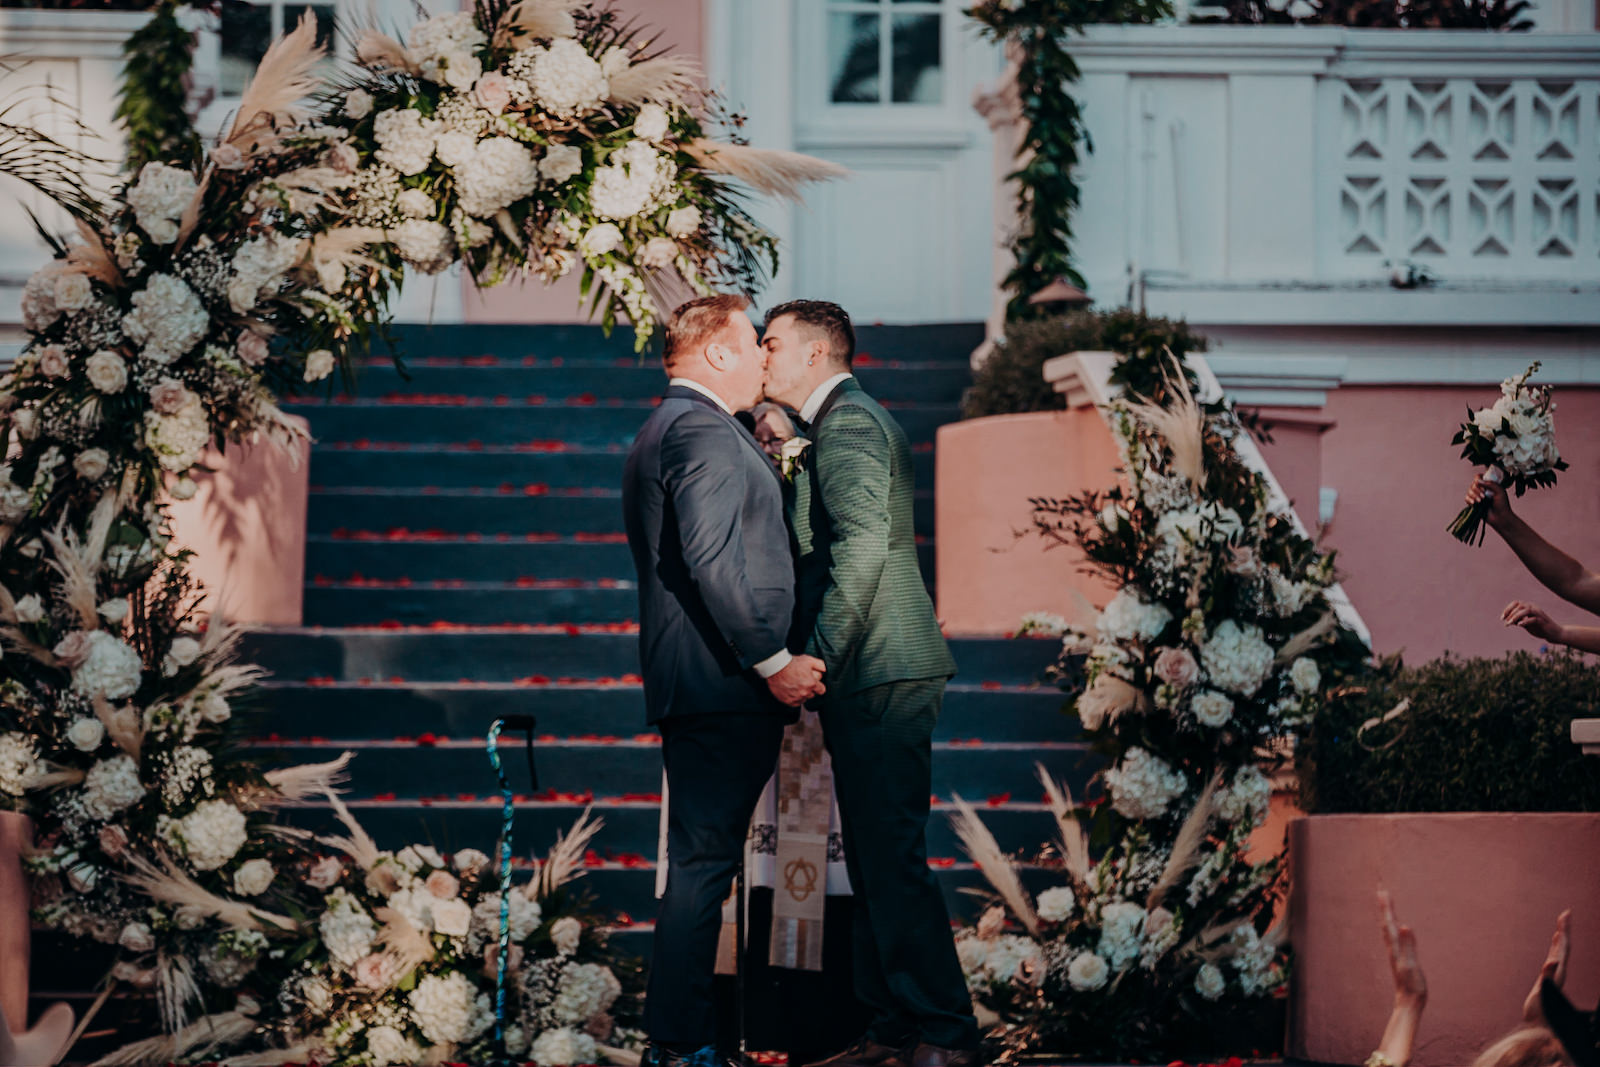 Grooms First Kiss at the Alter on Wedding Day Portrait | St. Petersburg Wedding Planner Coastal Coordinating